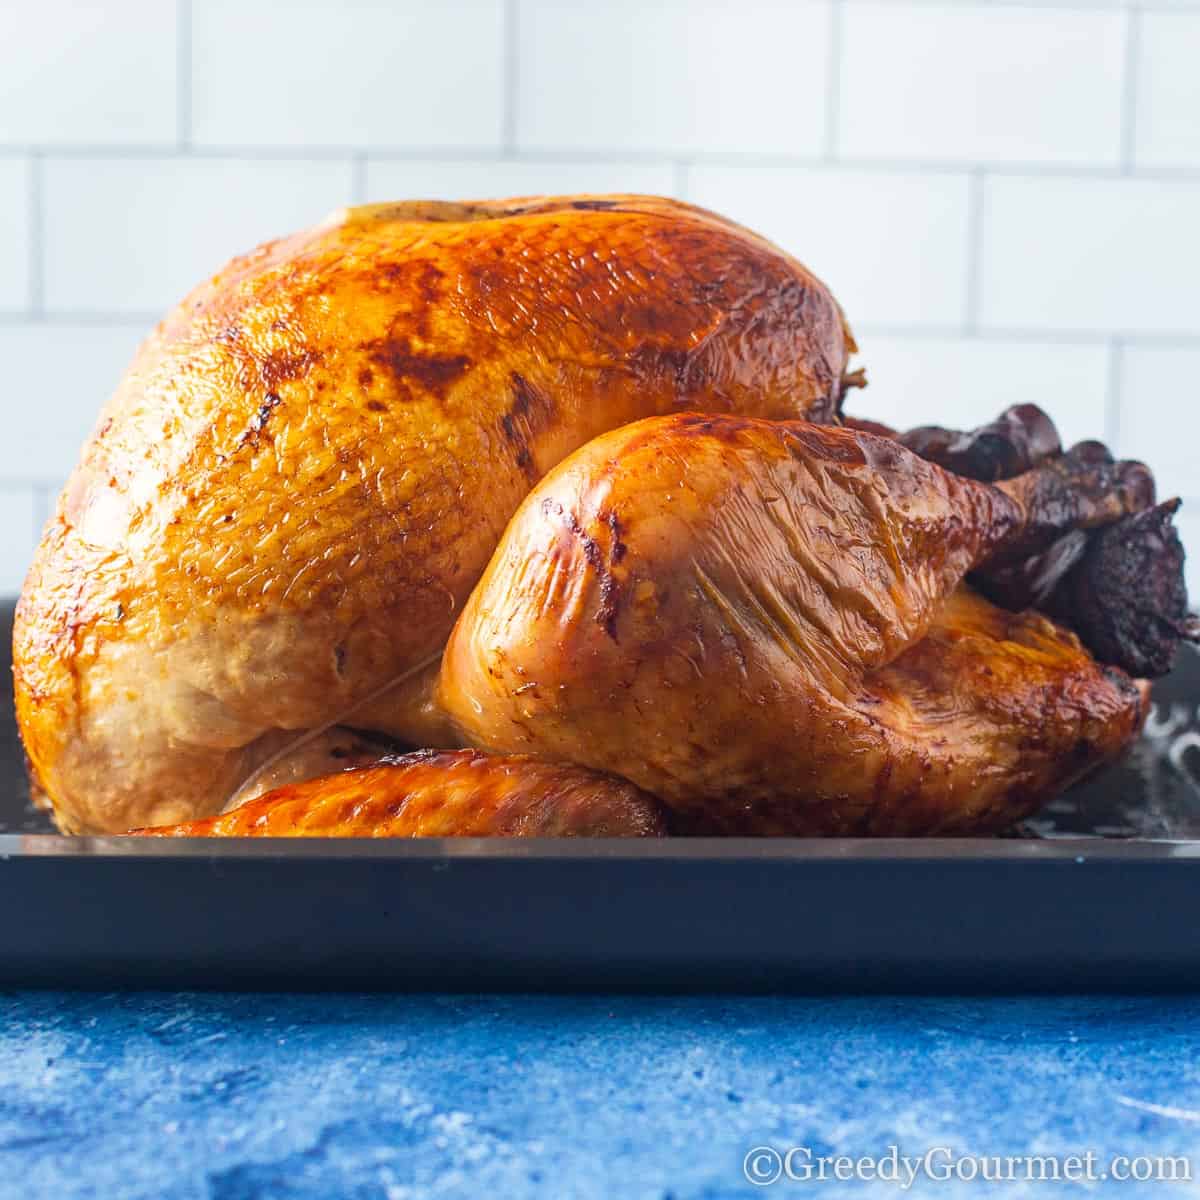 At What Internal Temperature Is Turkey Done?